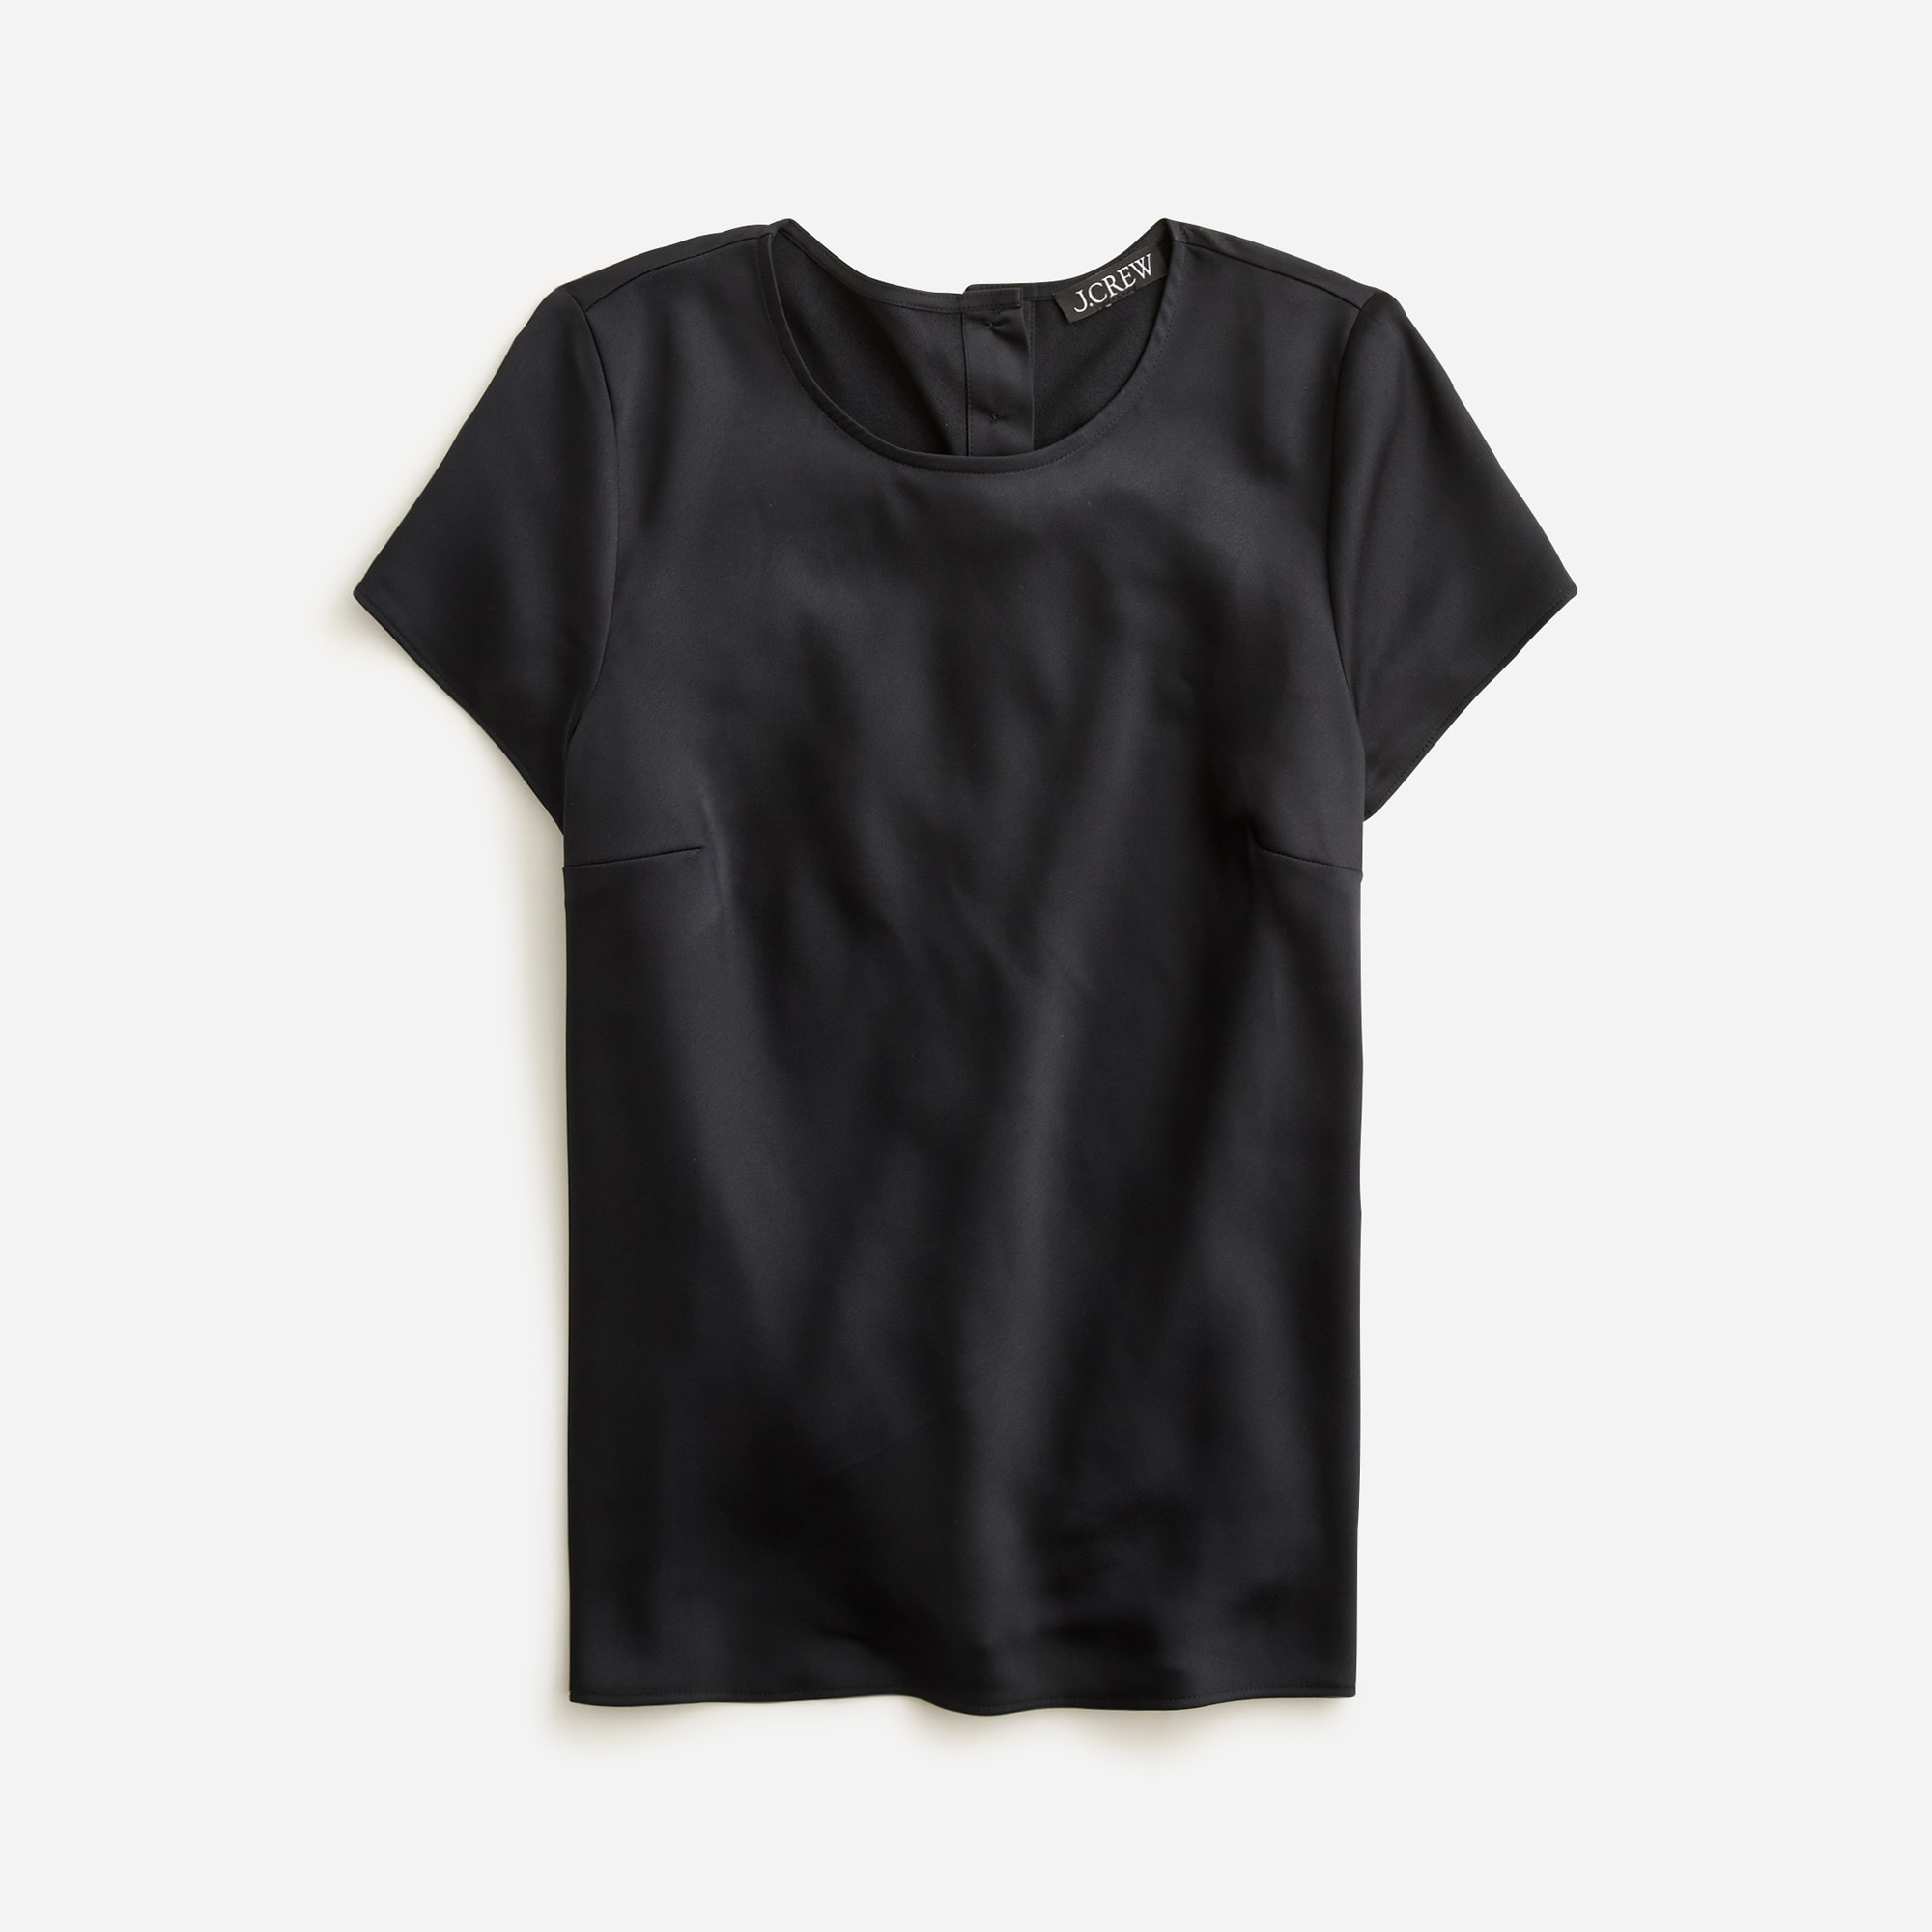 womens Short-sleeve button-back top in everyday crepe